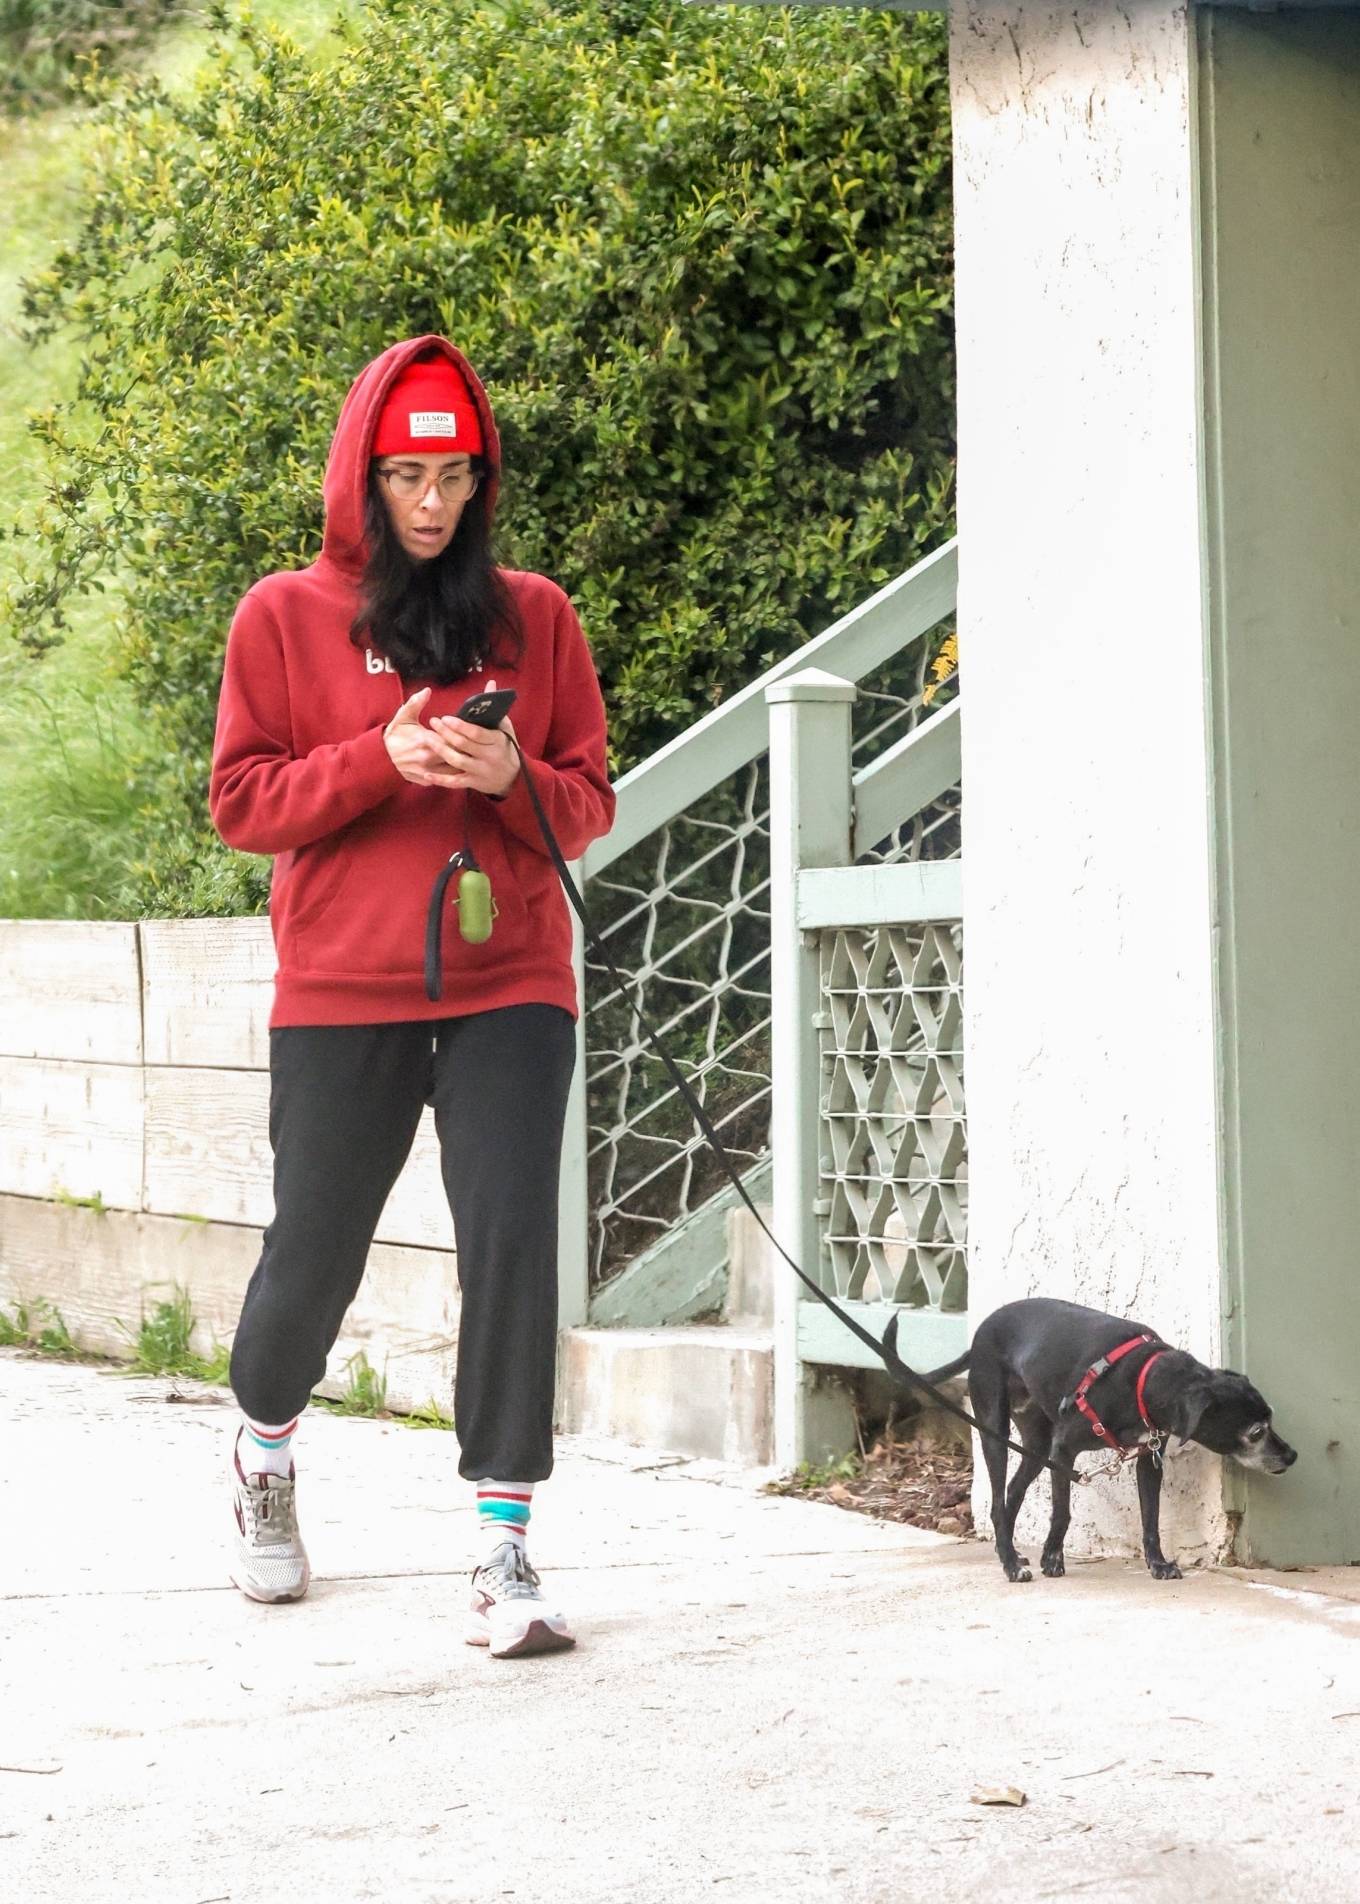 Sarah Silverman - Seen with her dog at Griffith Park in Los Angeles